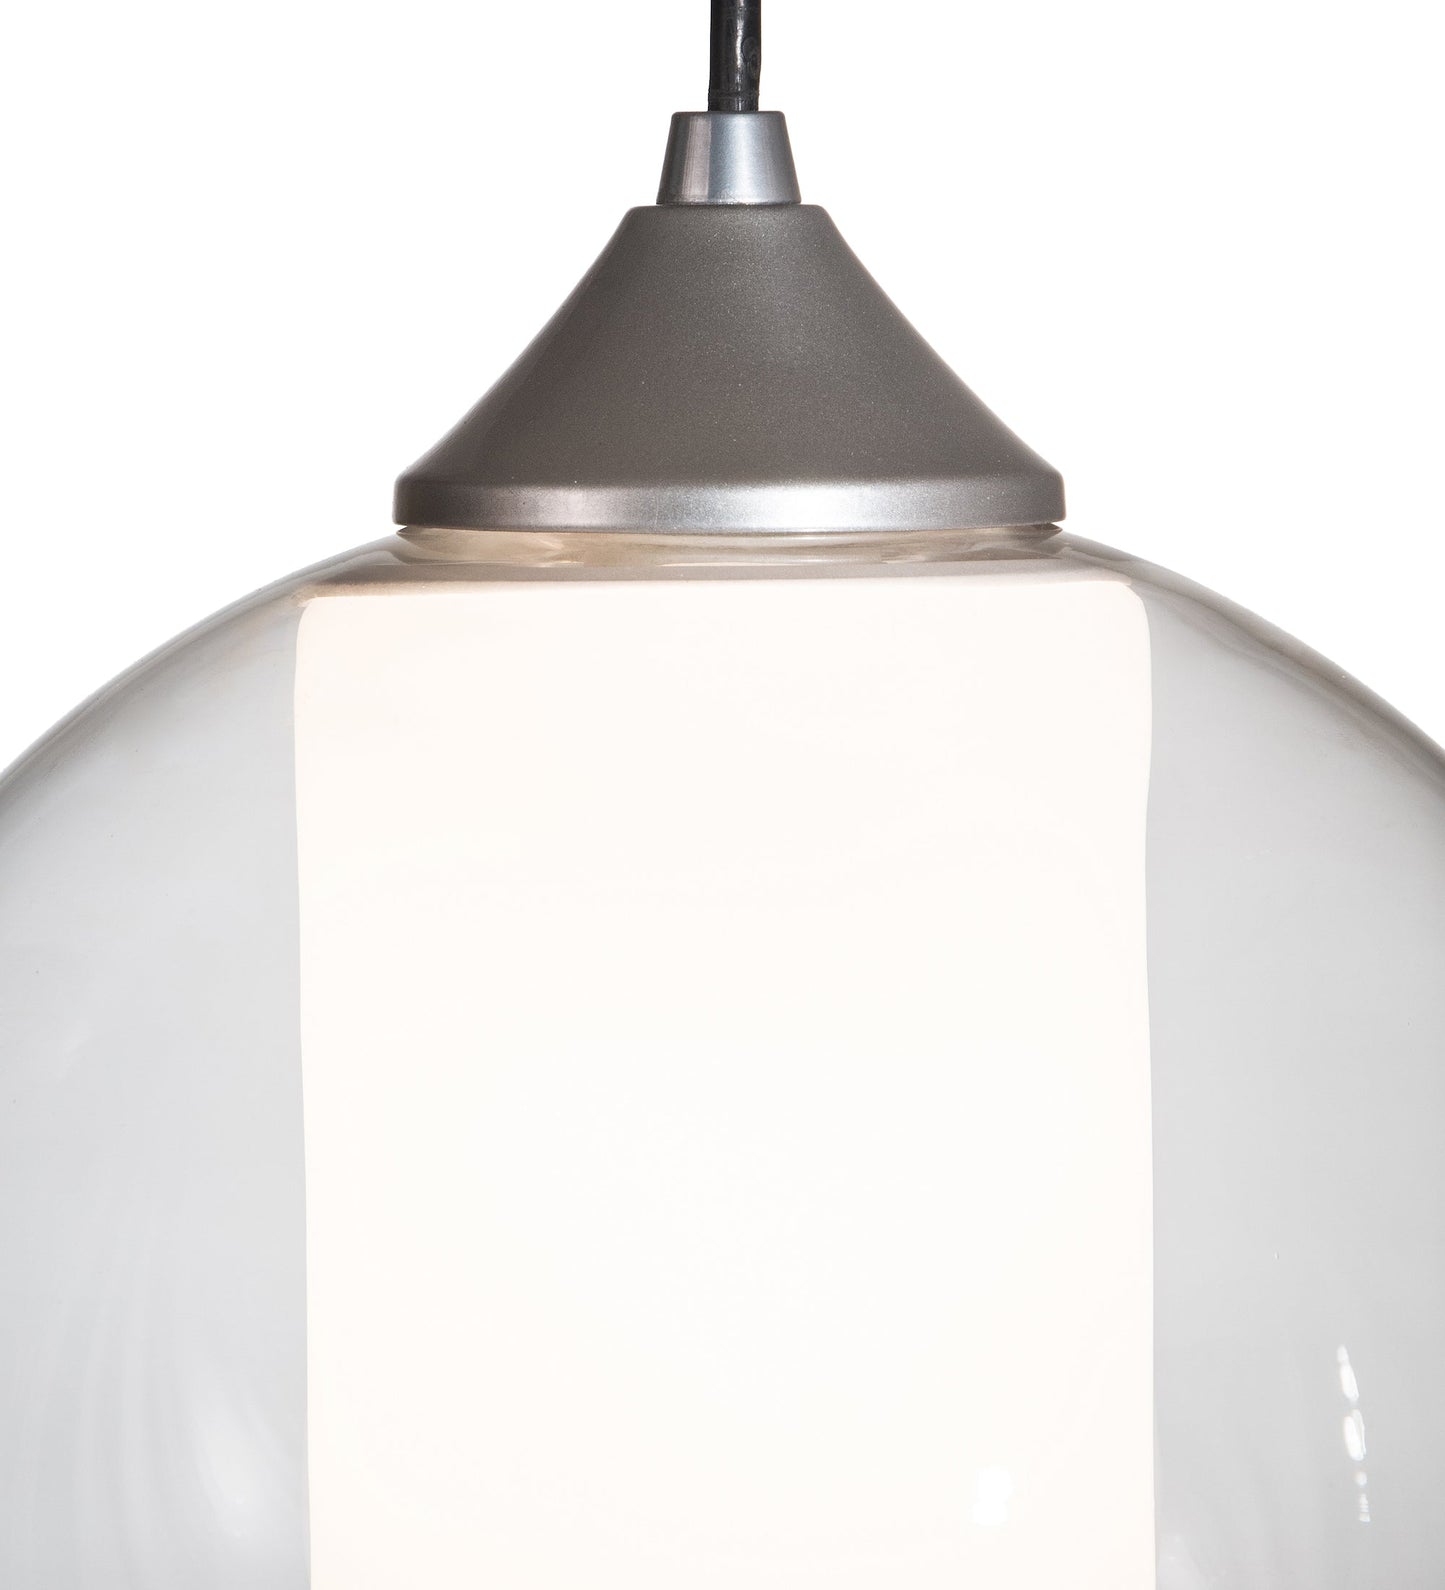 10" Bola Cilindro Pendant by 2nd Ave Lighting